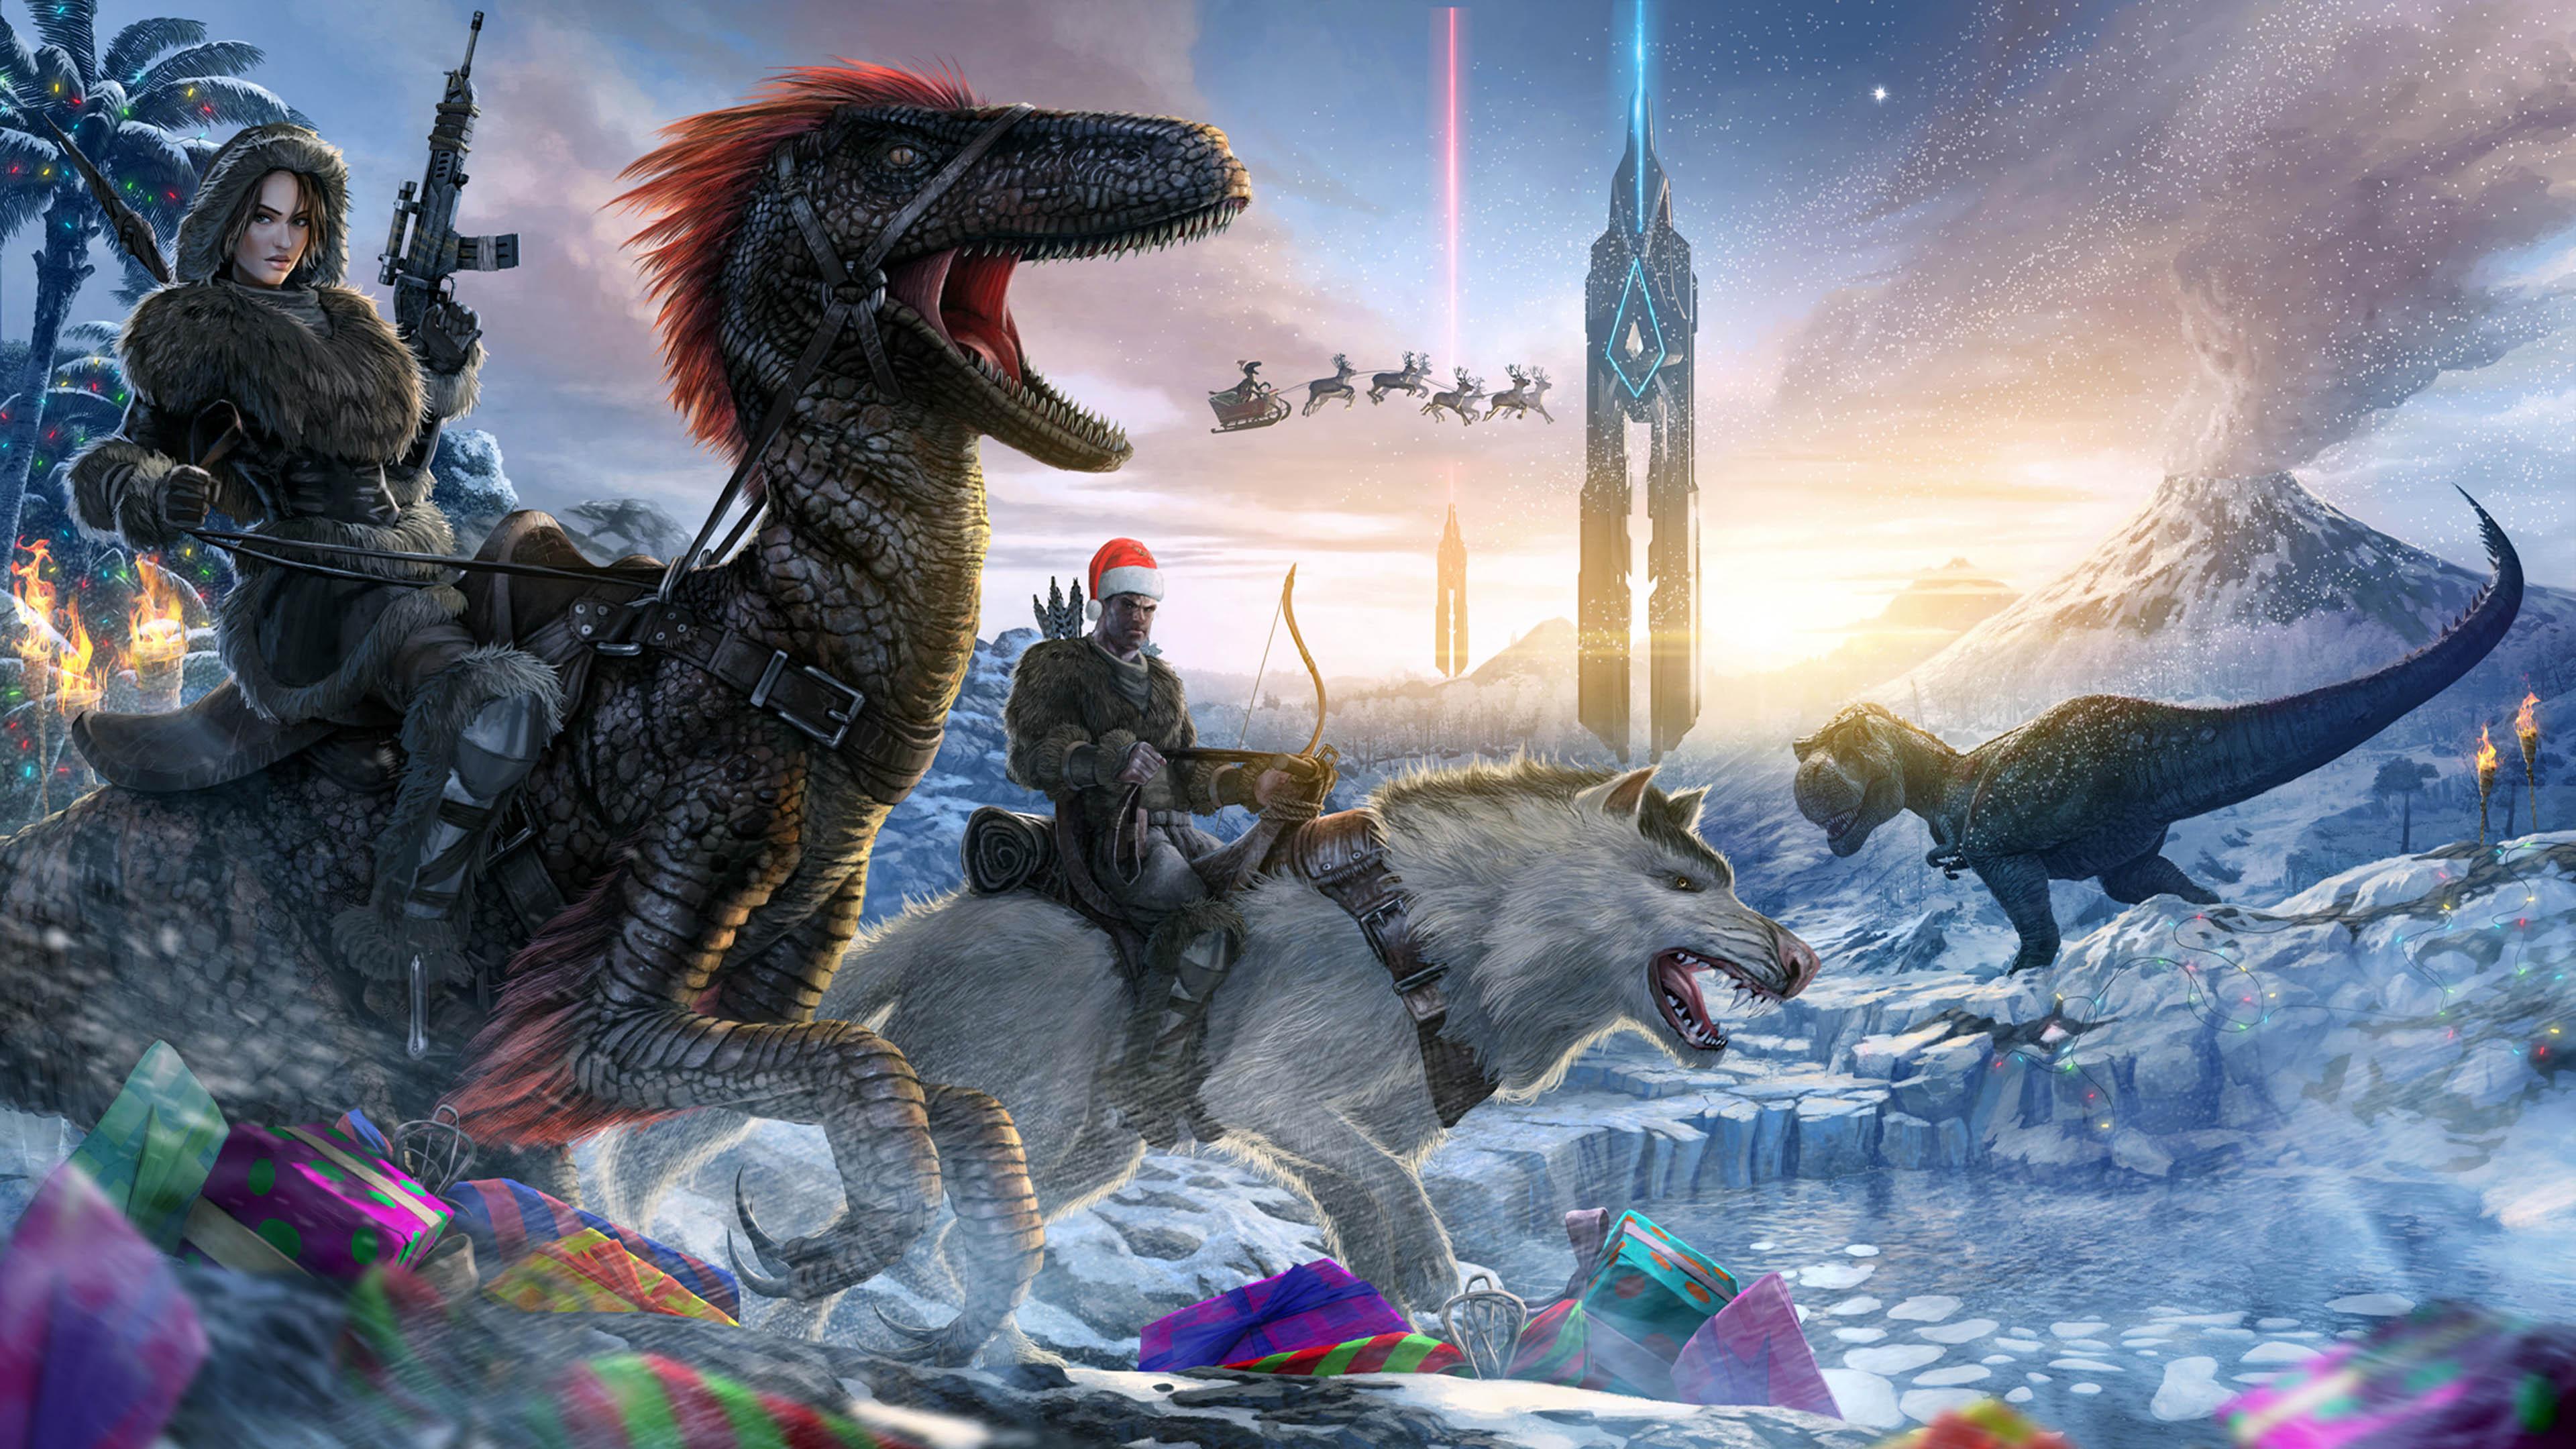 ARK: Survival Evolved HD Wallpaper and Background Image